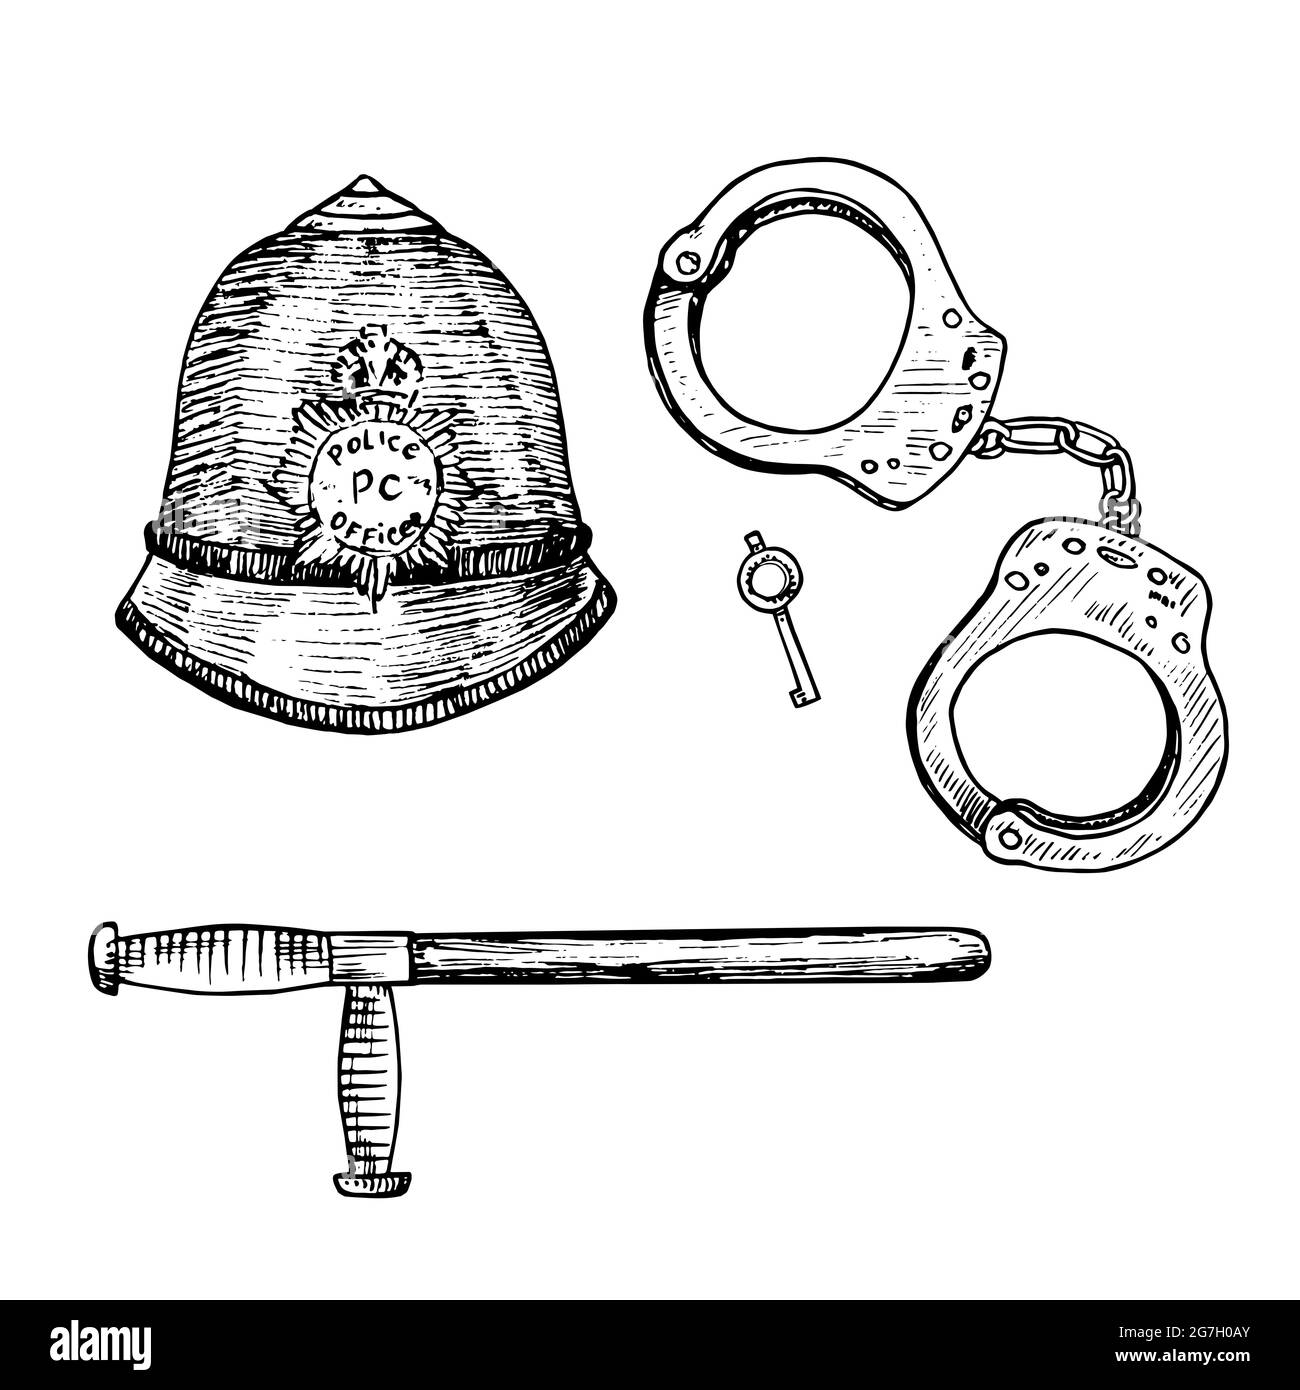 The custodian helmet (British Bobby police hat), Handcuffs and key, Police baton (truncheon or nightstick),  gravure style ink drawing illustration is Stock Photo